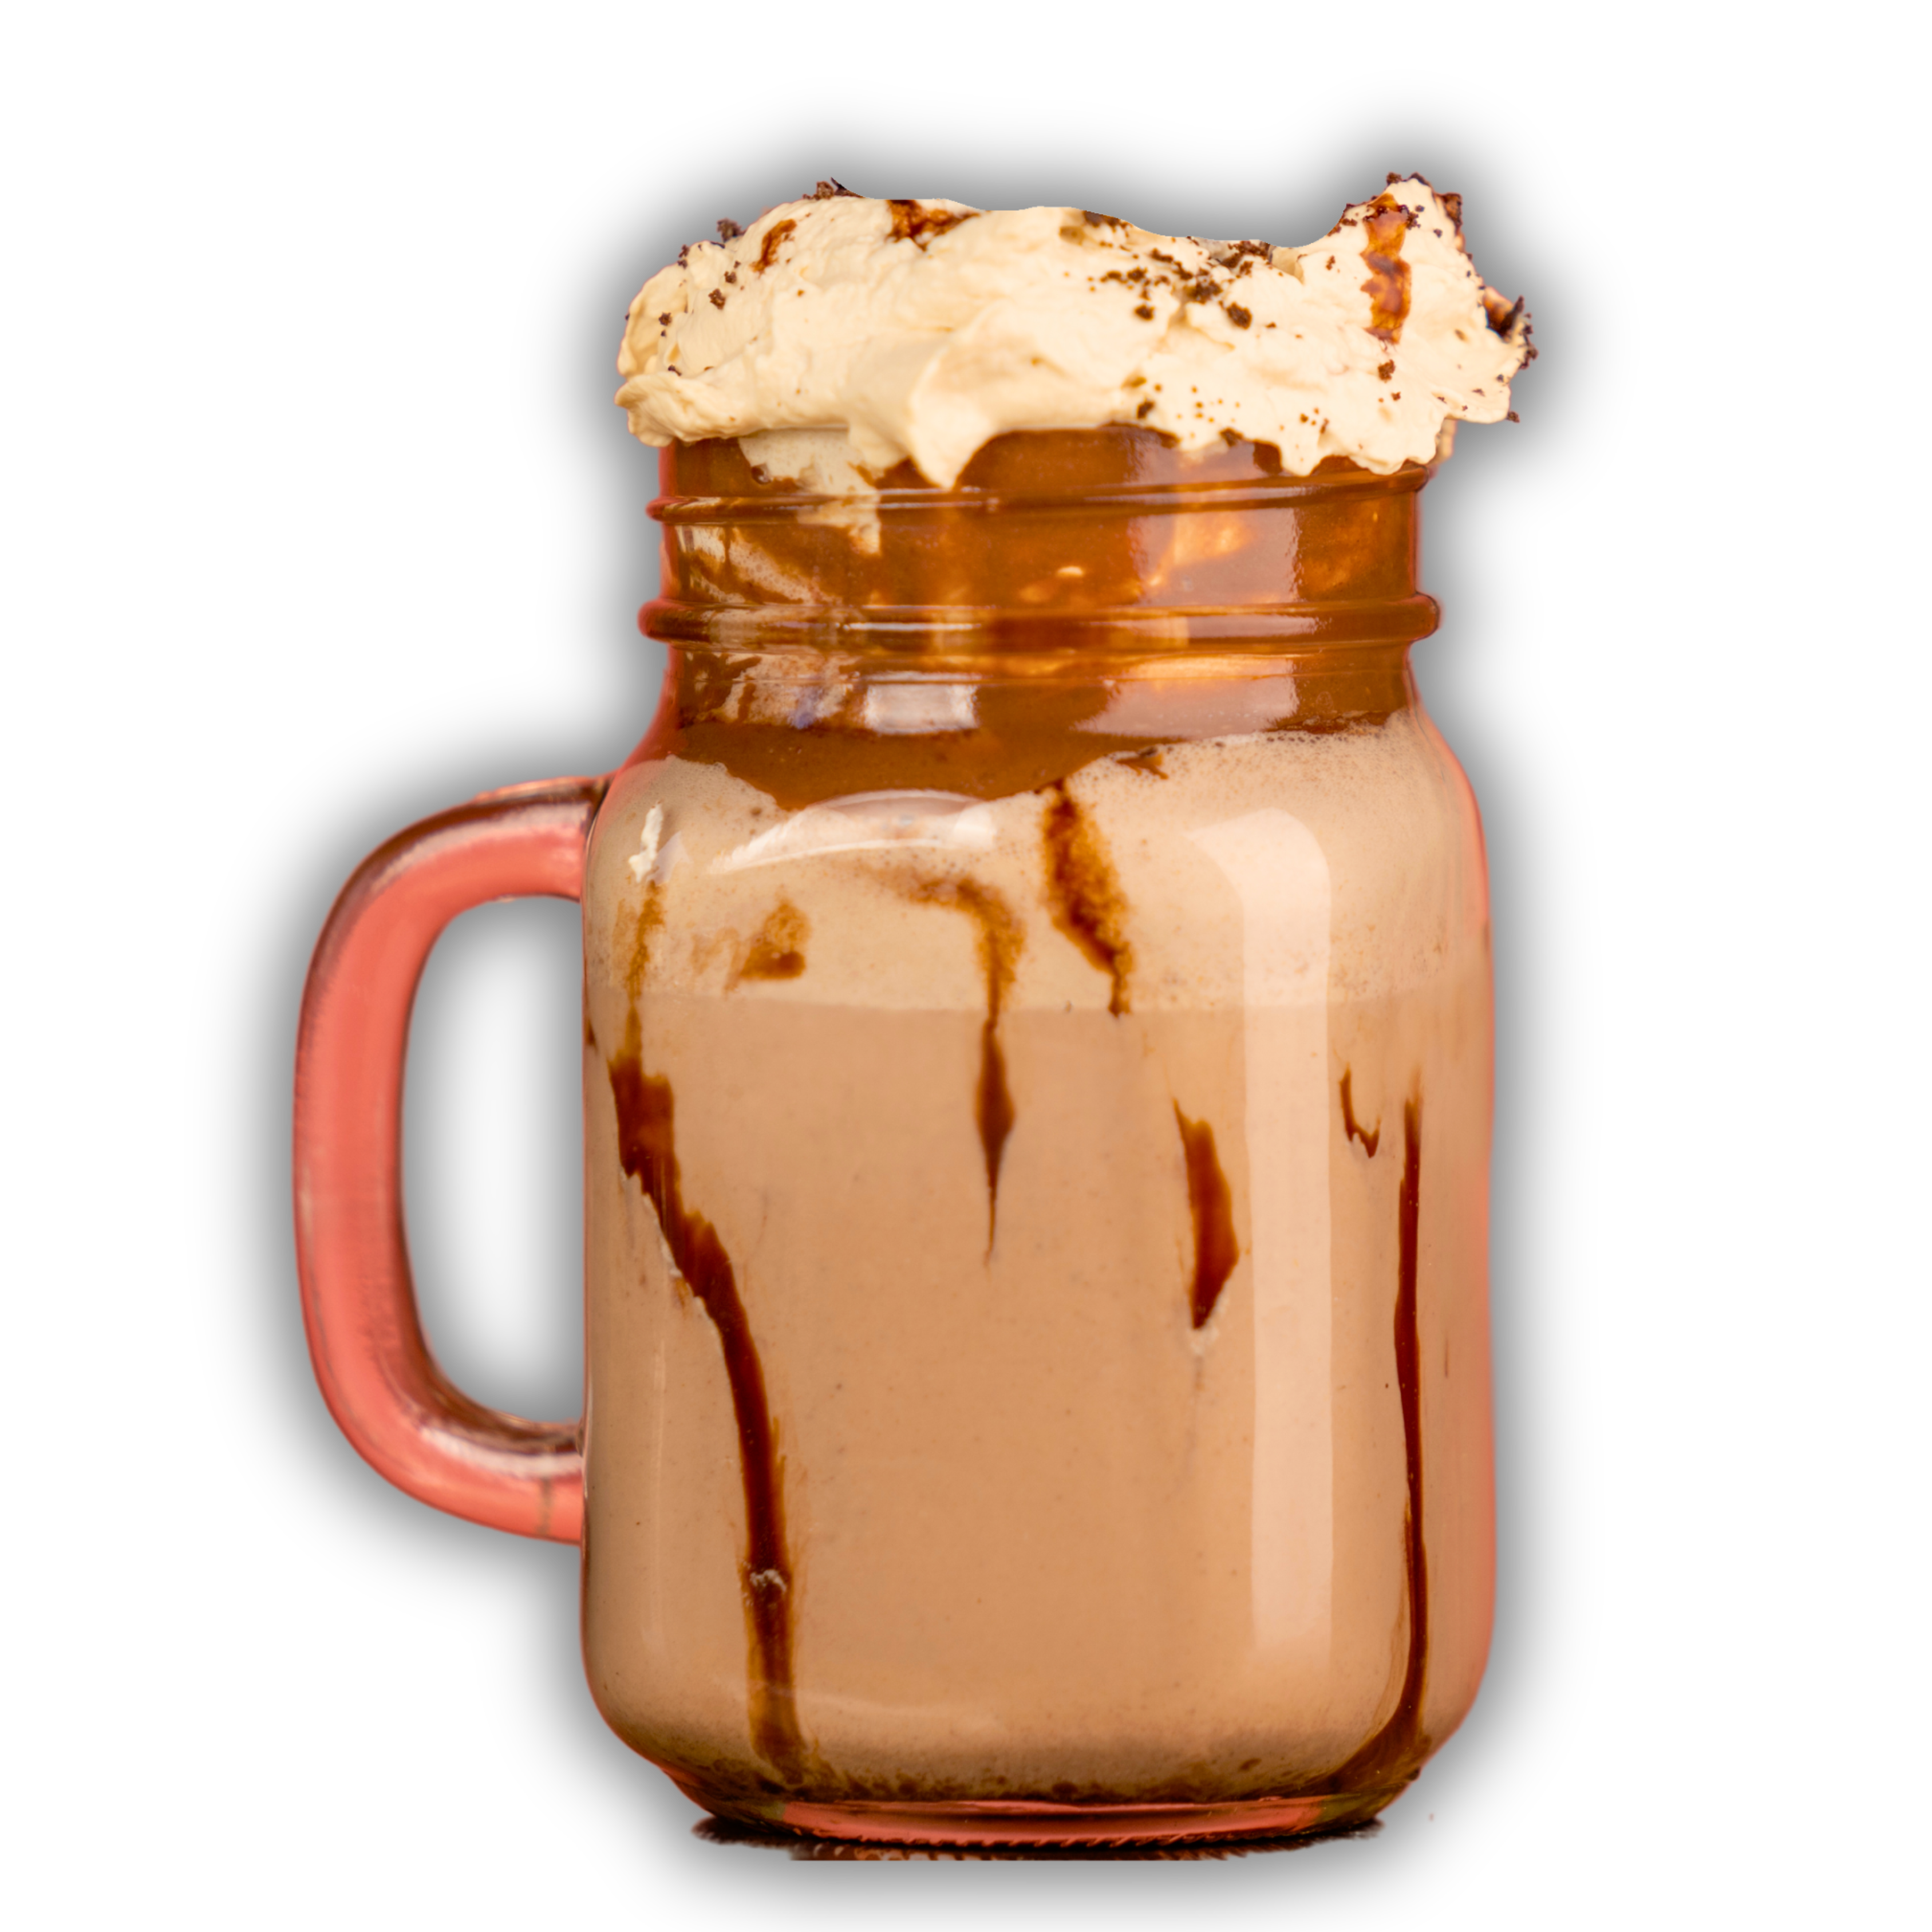 Indulge in the Sweetness of sweetnesses in the Signature of signatures, the Dulce de Leche Shake..